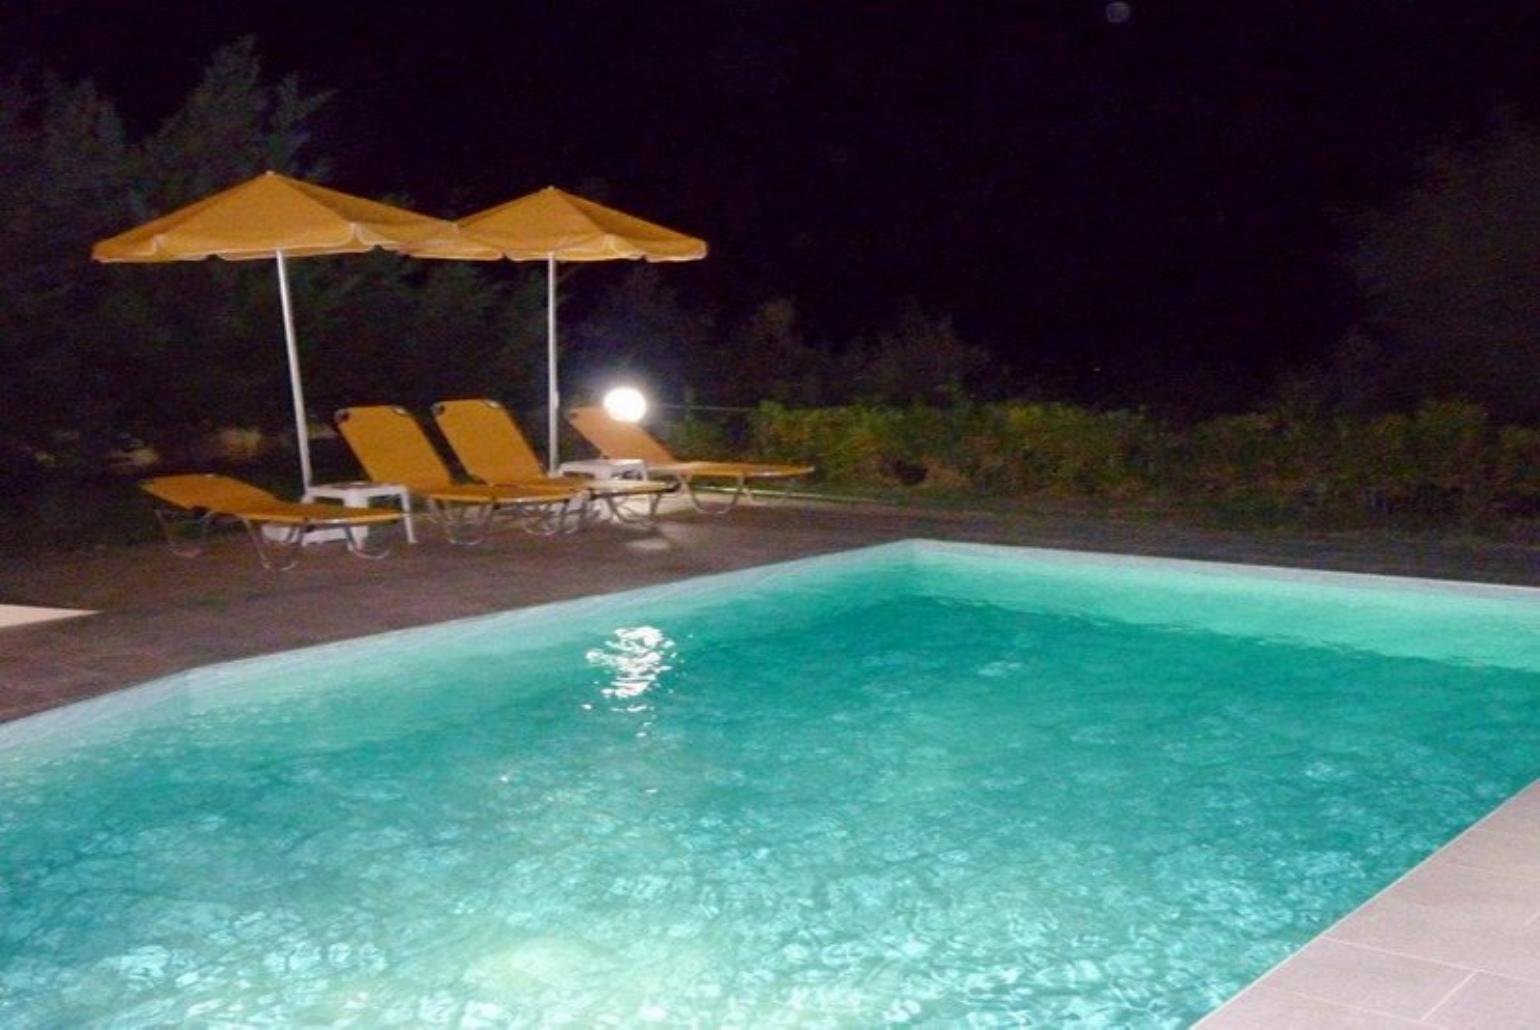 Beautiful villa with private pool, terrace, and lawn at night